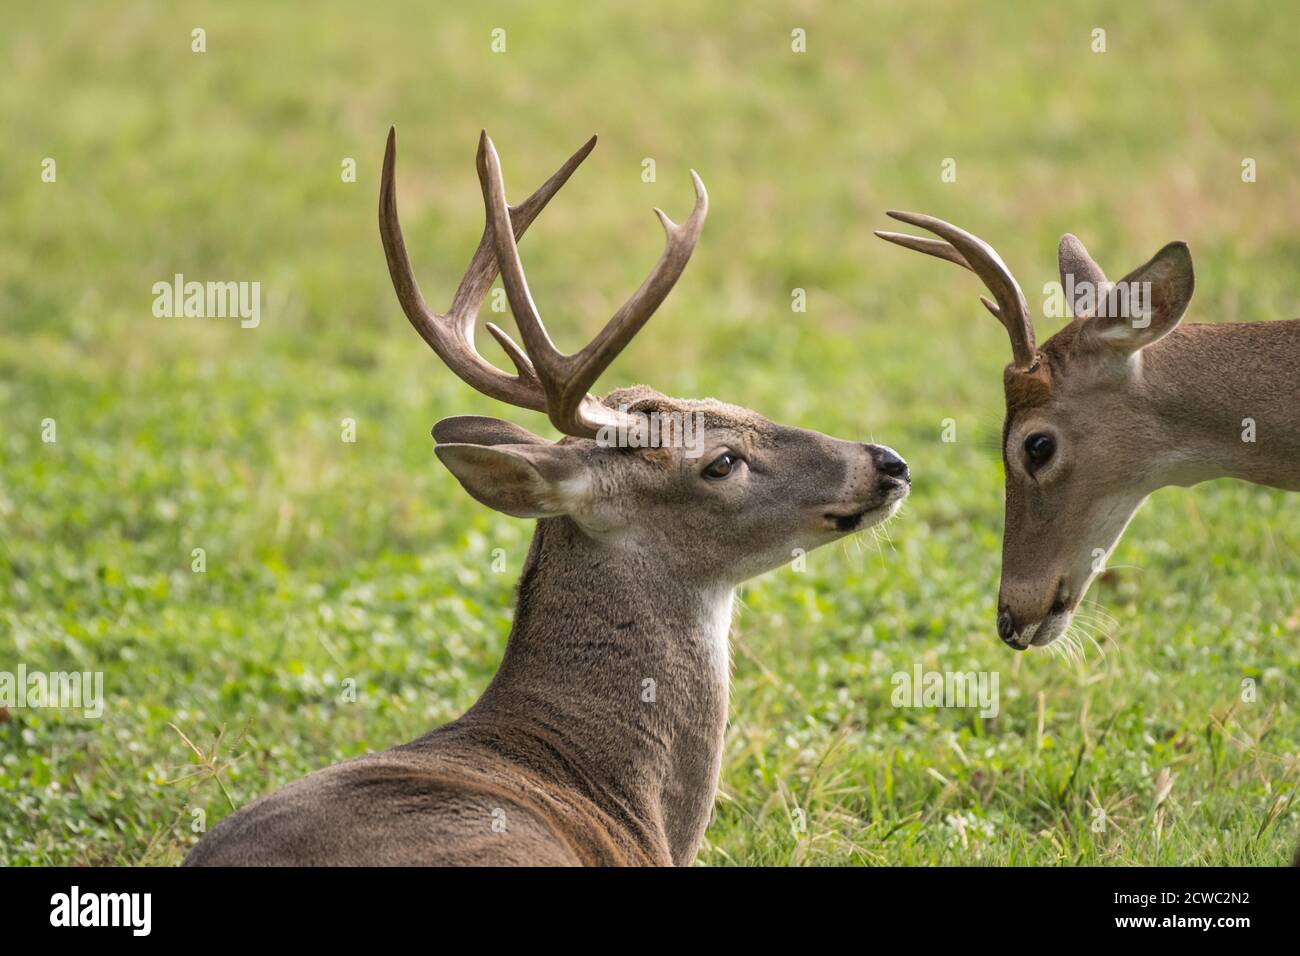 Two Texas whitetail buck deer odocoileus virginianus interacting with each other. One buck is older dominant deer with larger antlers. Stock Photo